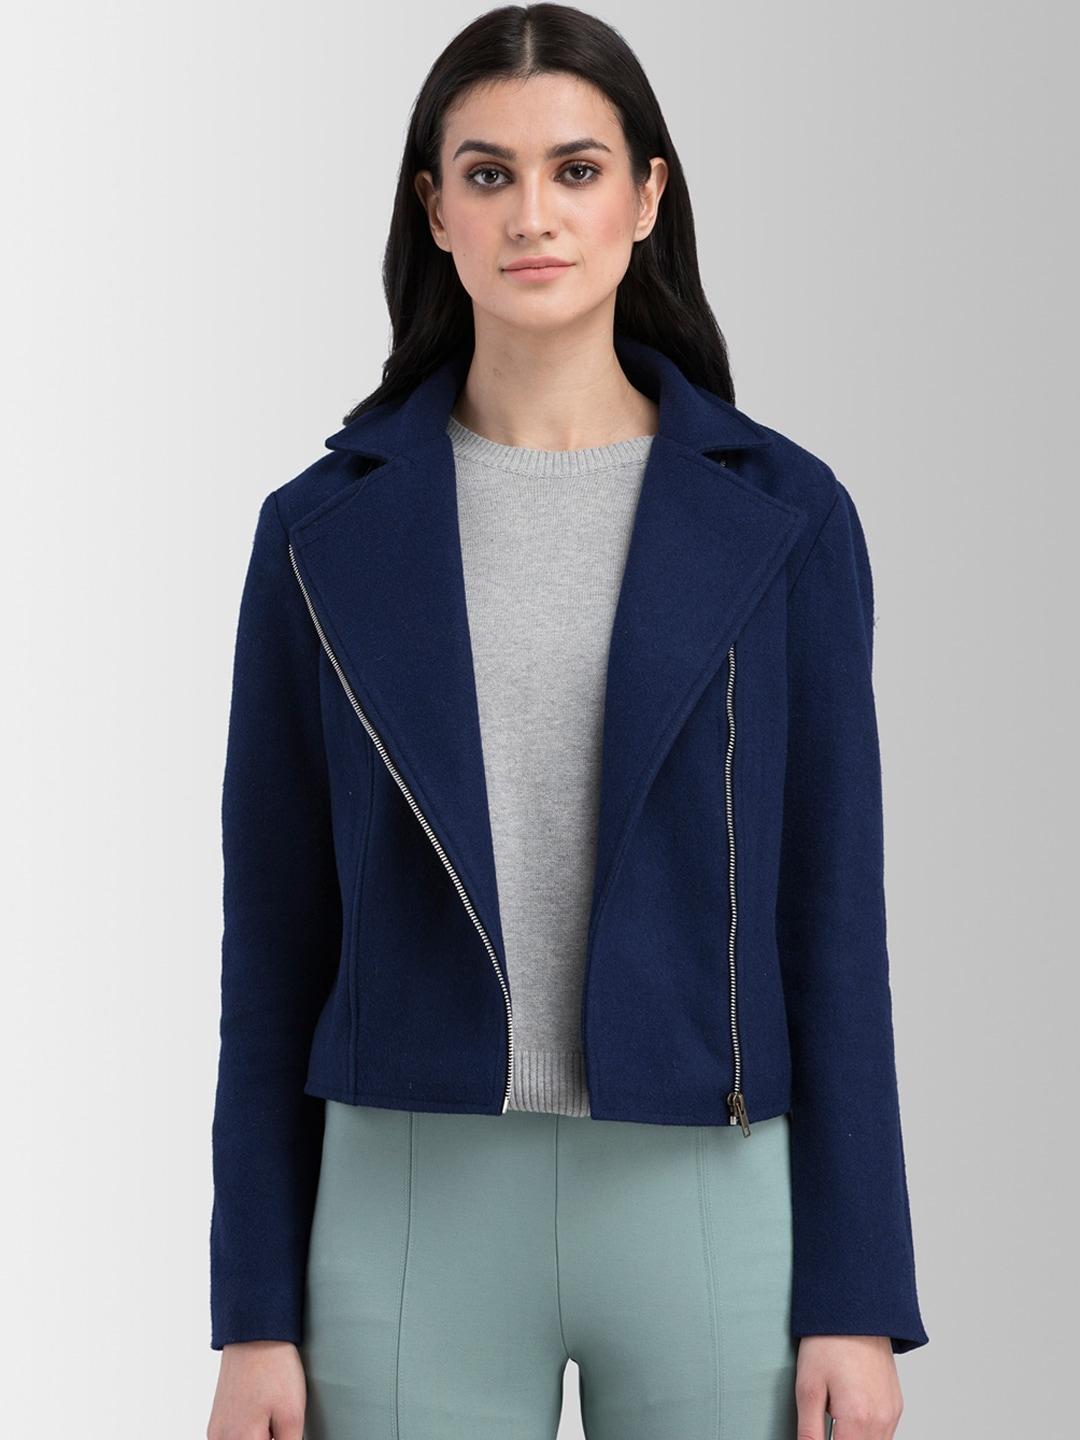 FableStreet Women Navy Blue Solid Tailored Jacket